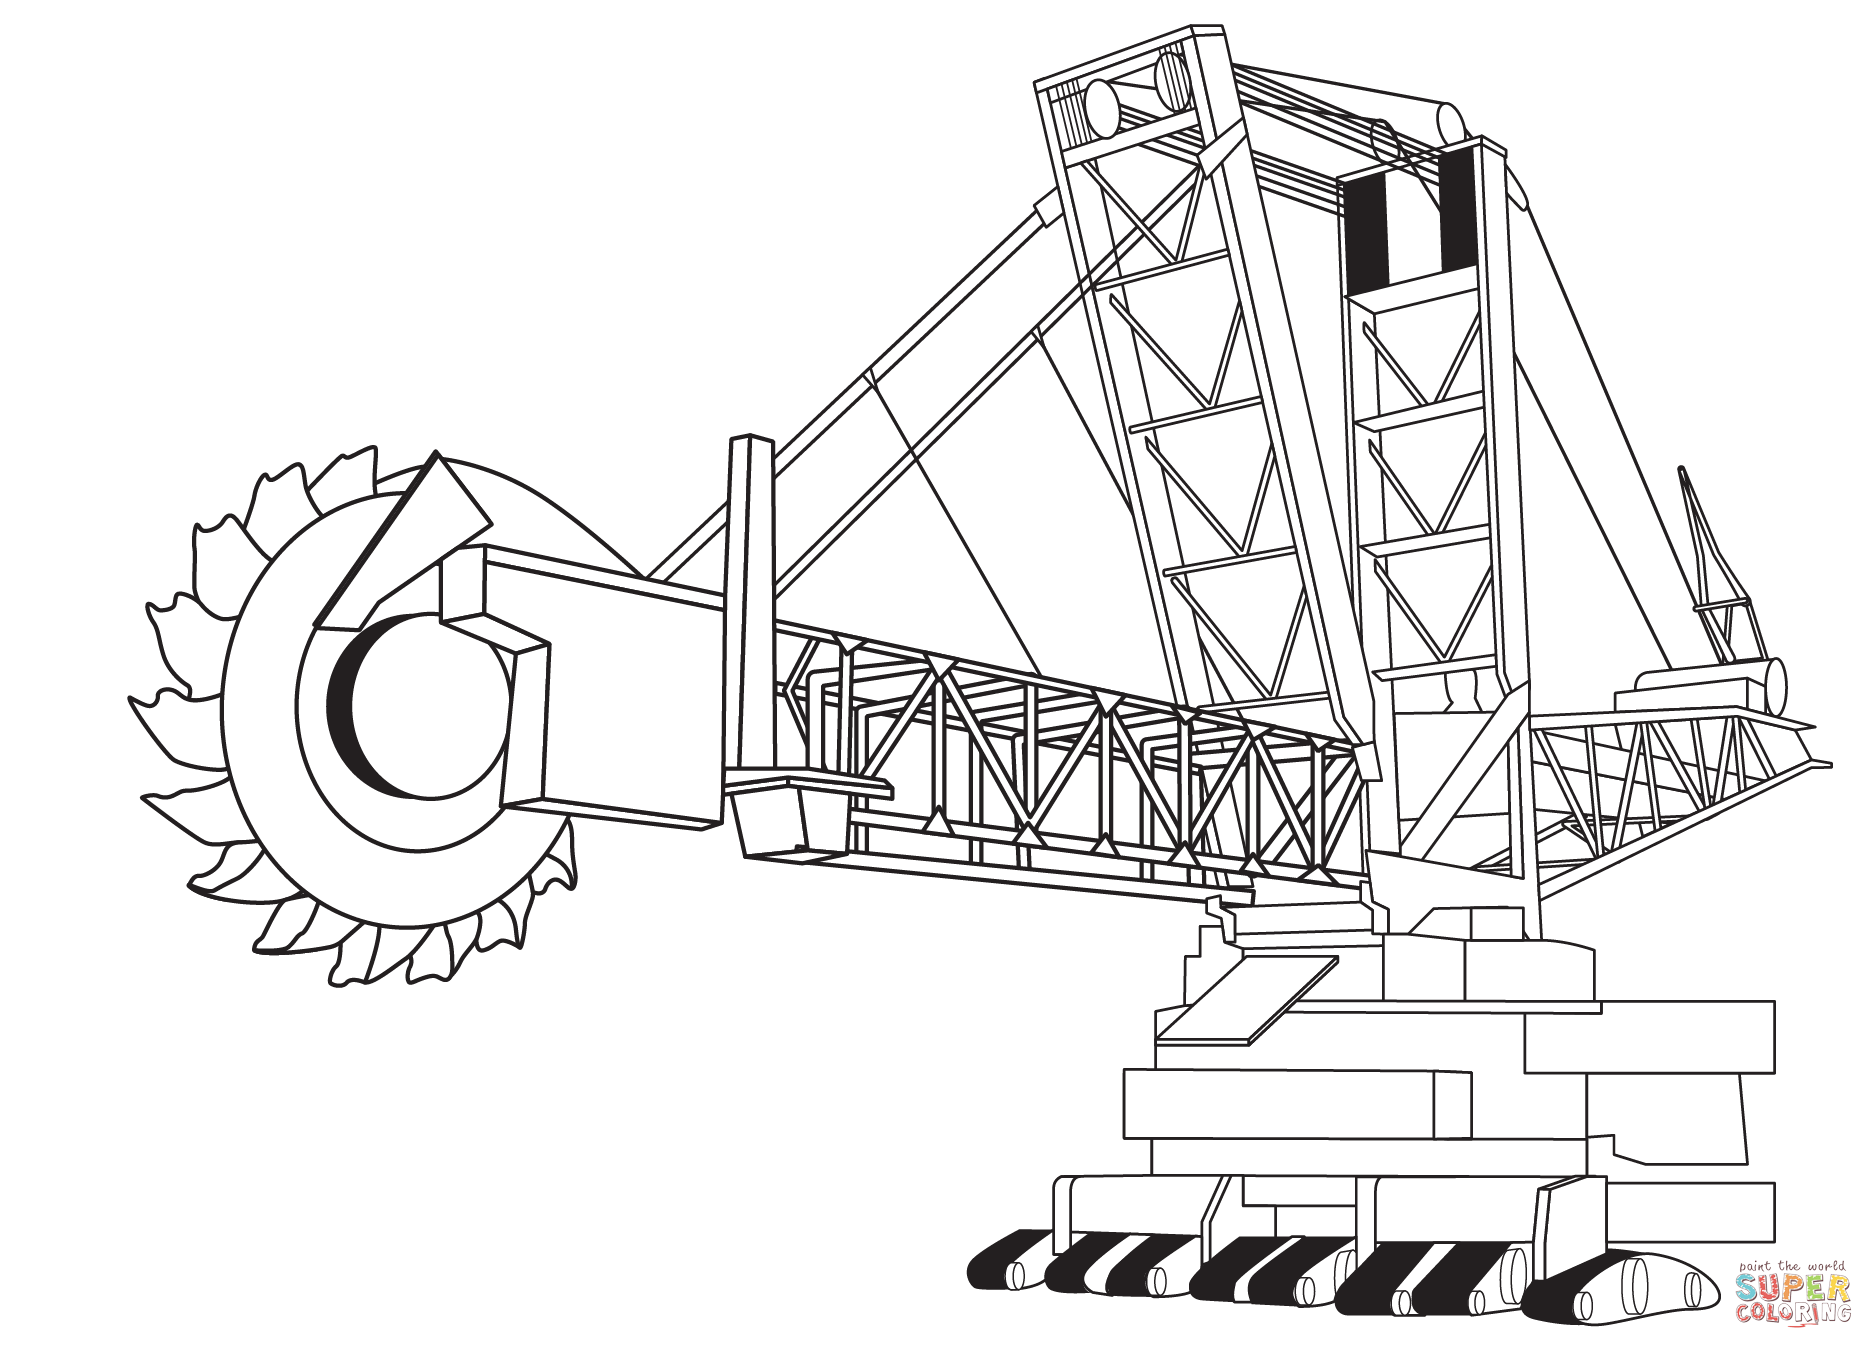 Bucket Wheel Excavator coloring page | Free Printable Coloring Pages